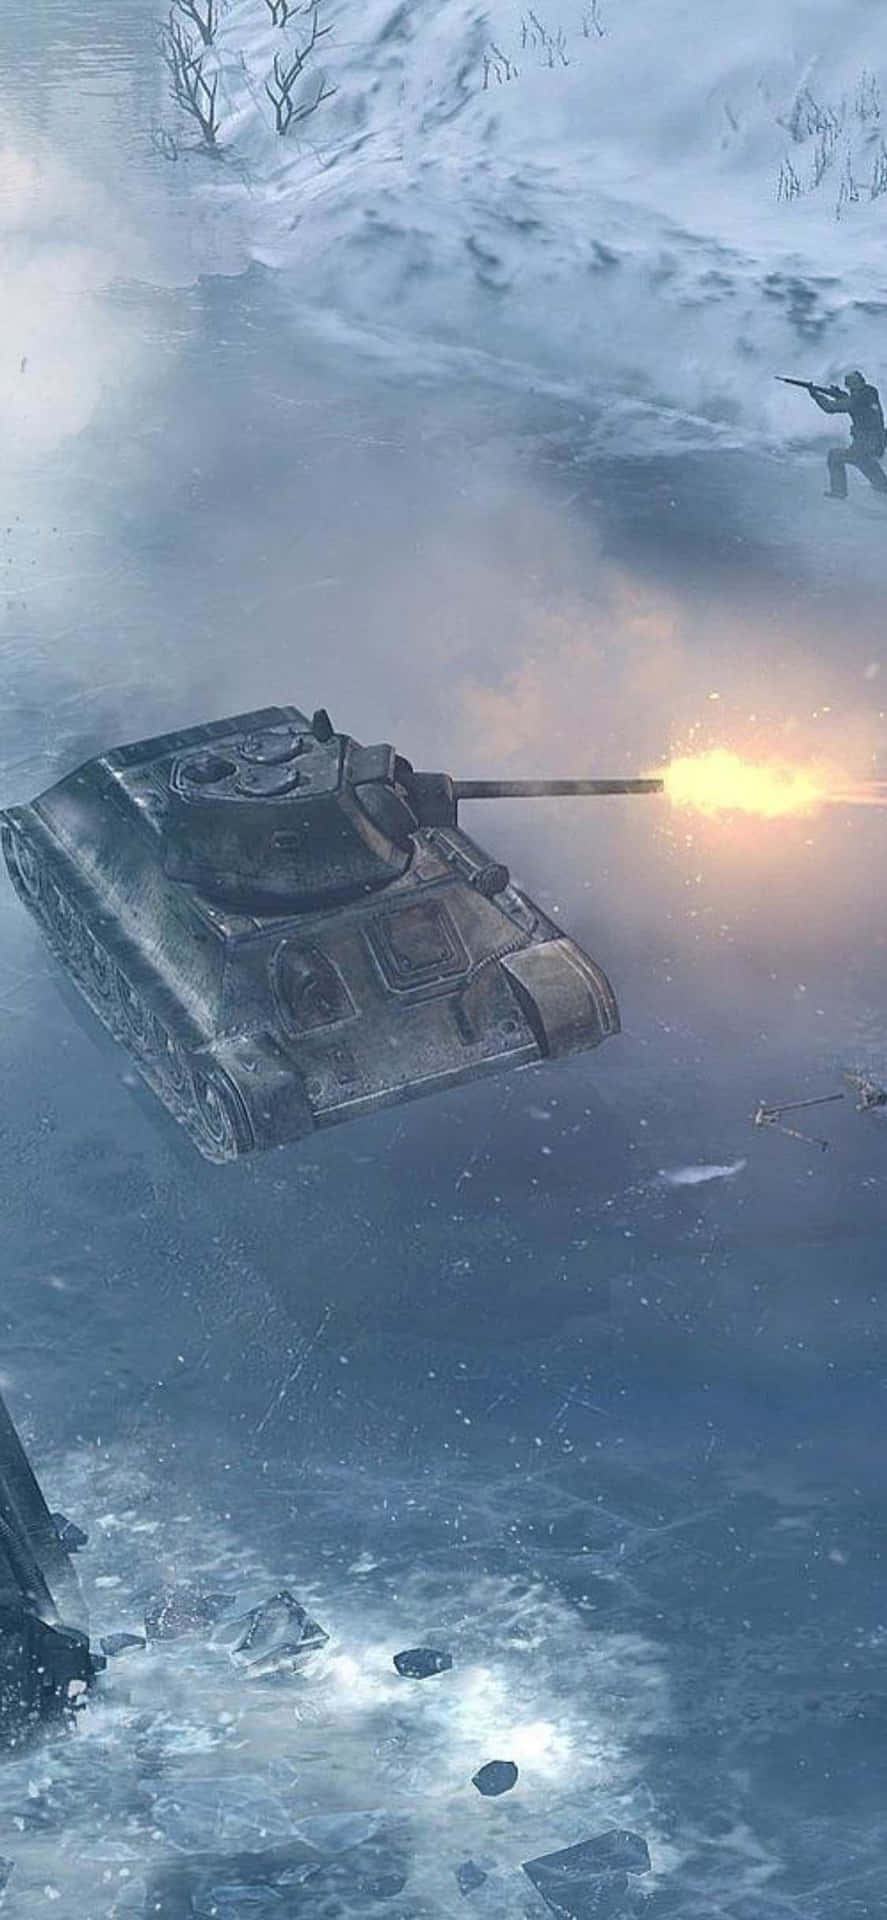 Iphone Xs Company Of Heroes 2 Background Firing Tank